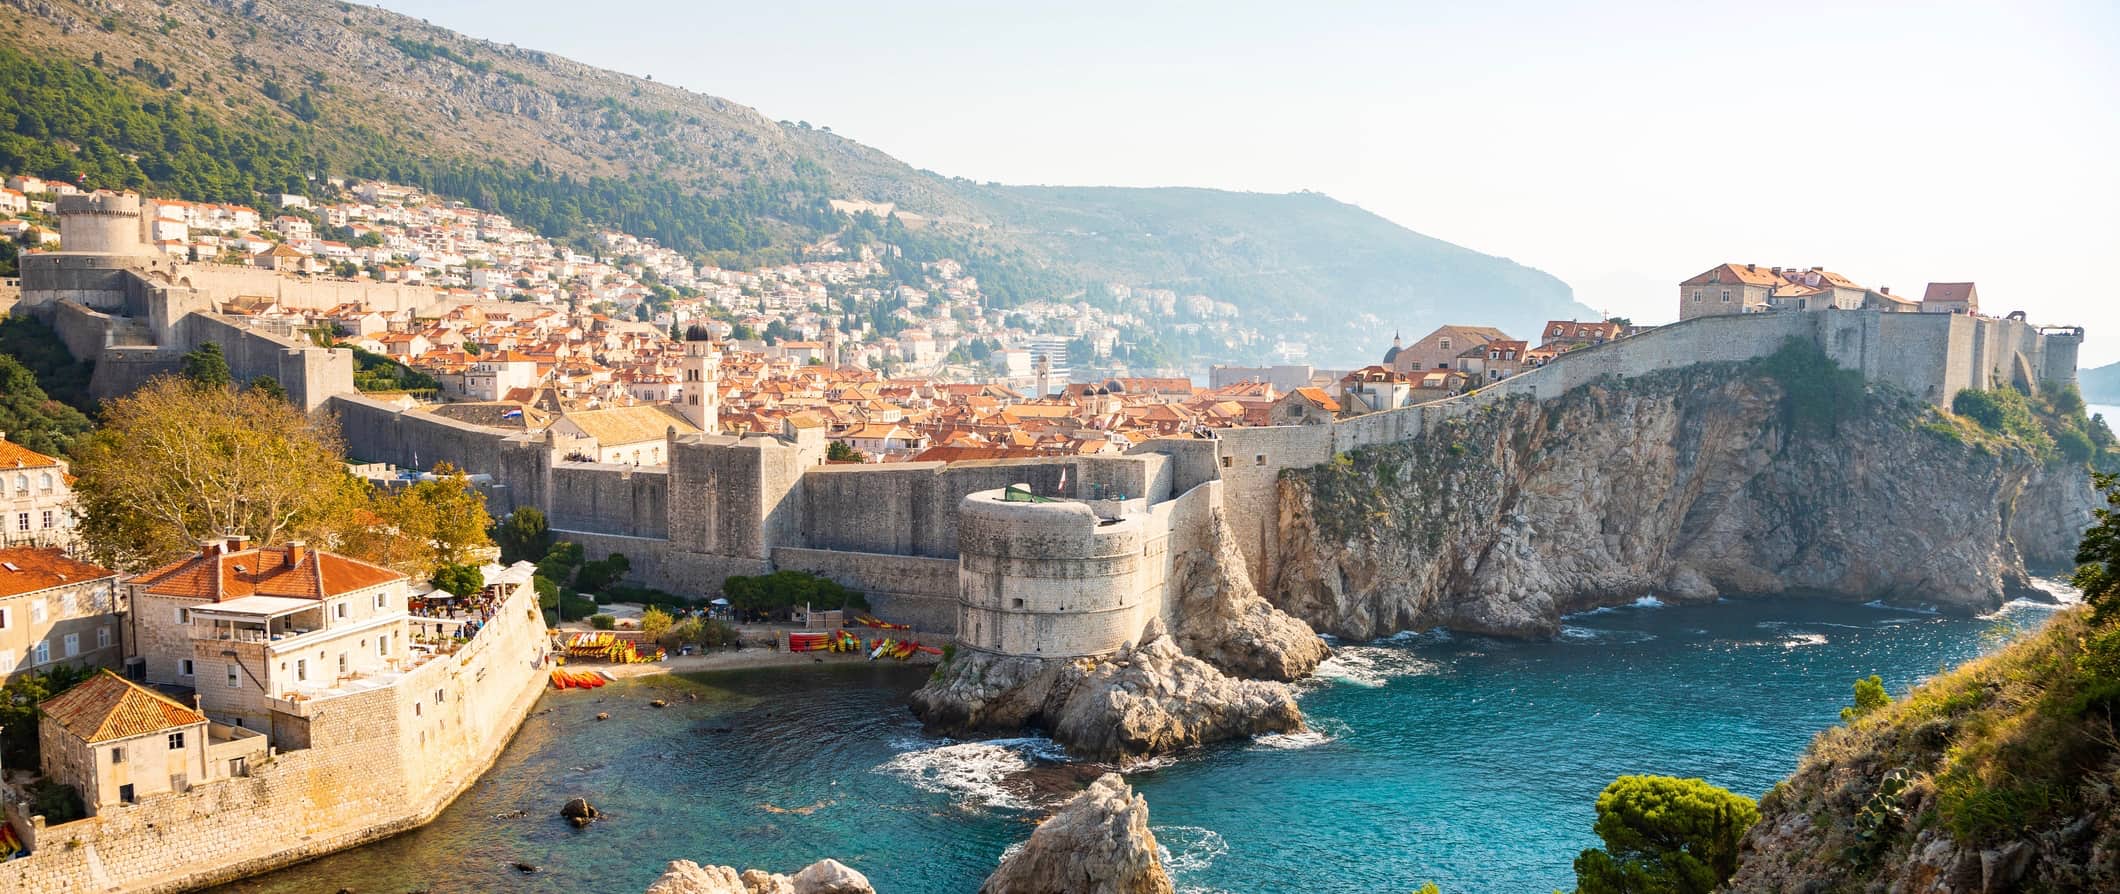 The charming Old Town of Dubrovnik, Croatia as seen from the sea